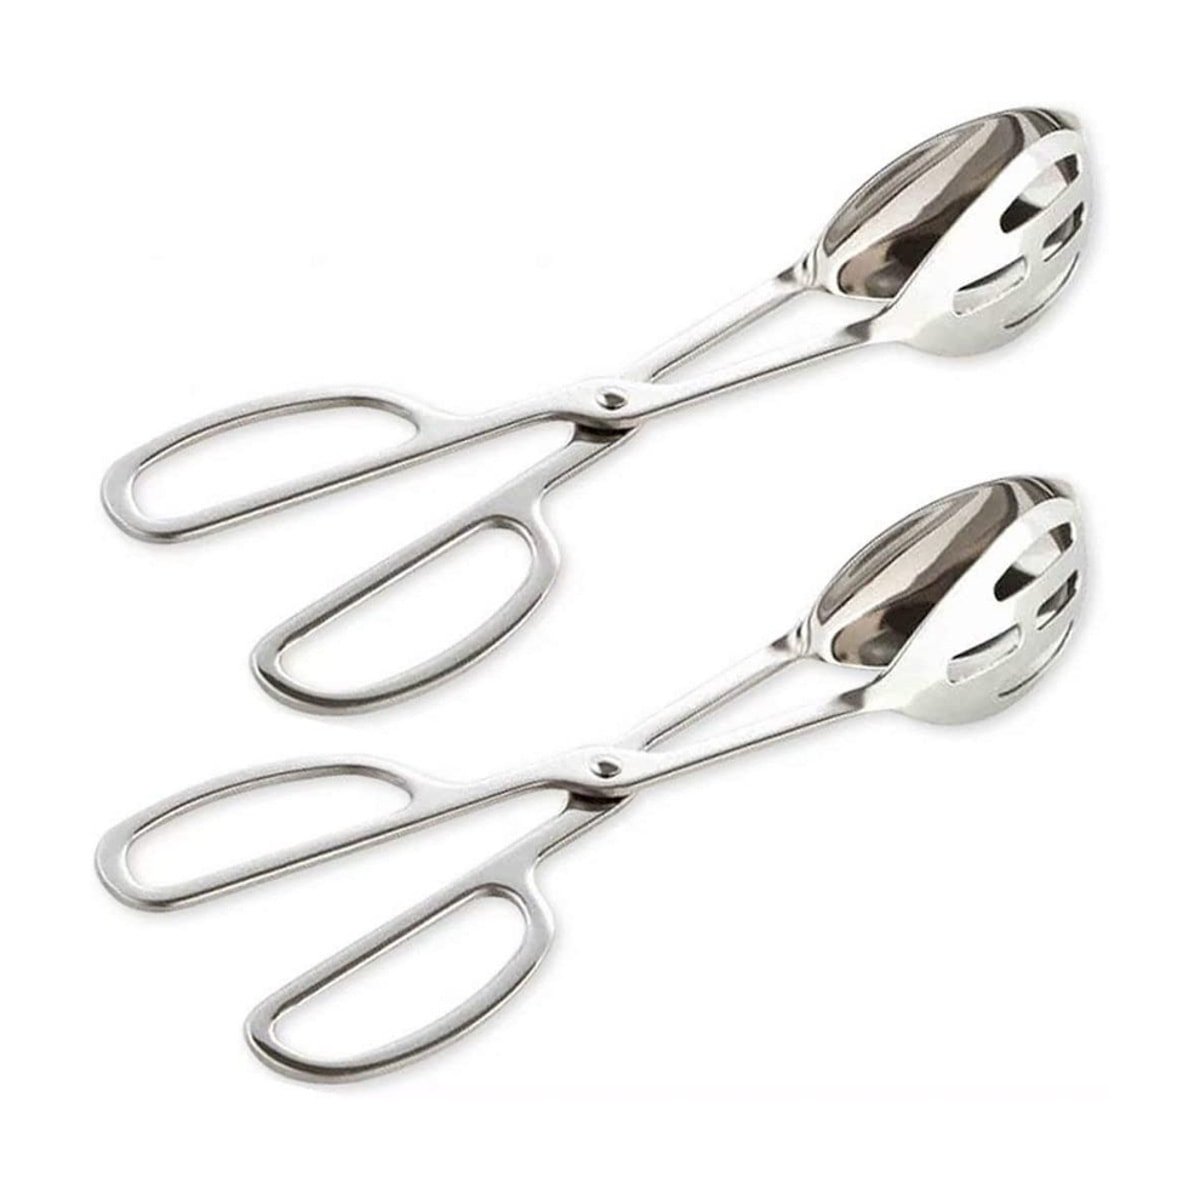 A set of two stainless steel buffet tongs.